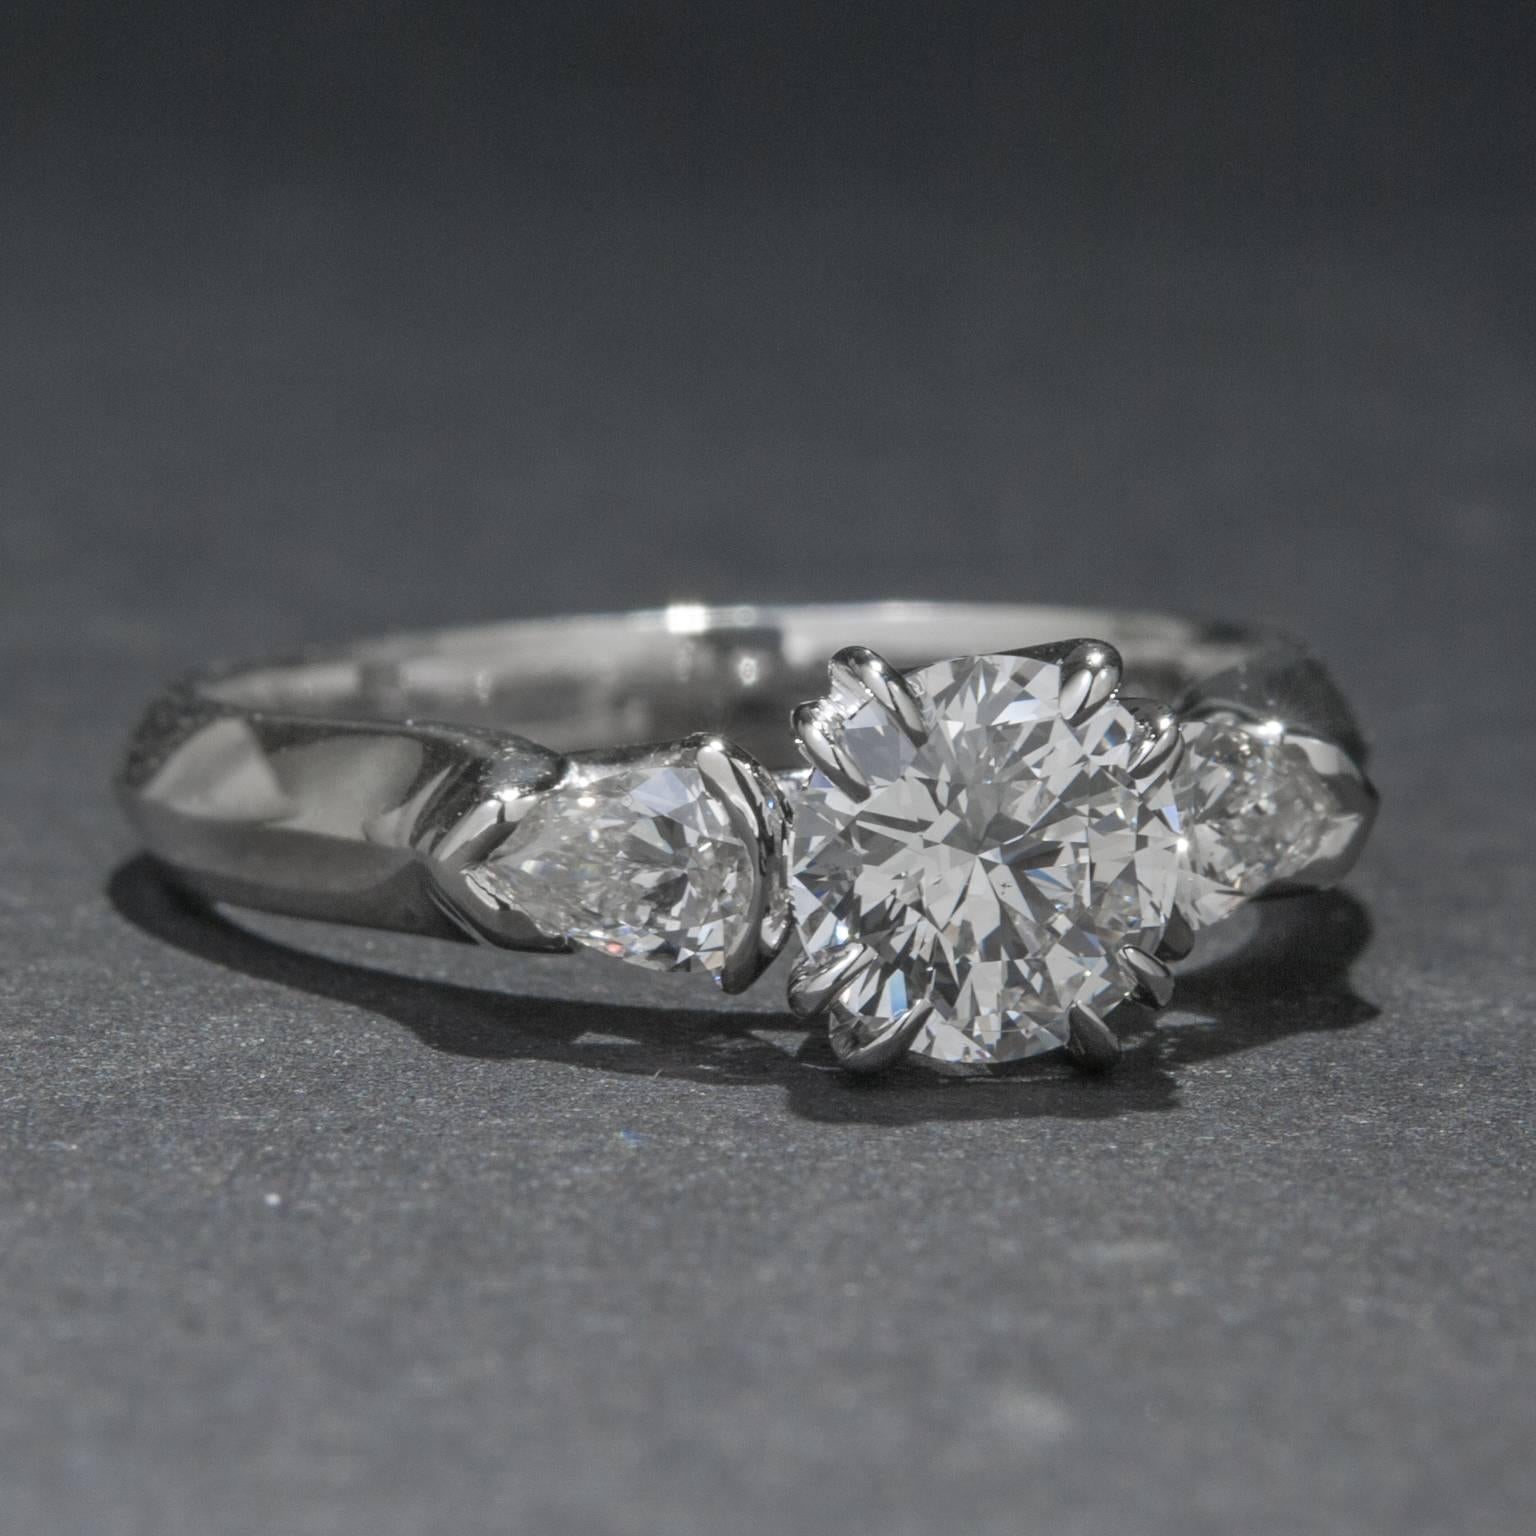 A beautiful three stone diamond ring with a classic look. This piece features a .90 carat GIA certified center diamond (F color, SI1 clarity) which is flanked by 2 pear shaped diamonds for a total of .38 carats. The ring is set in 18k white gold and